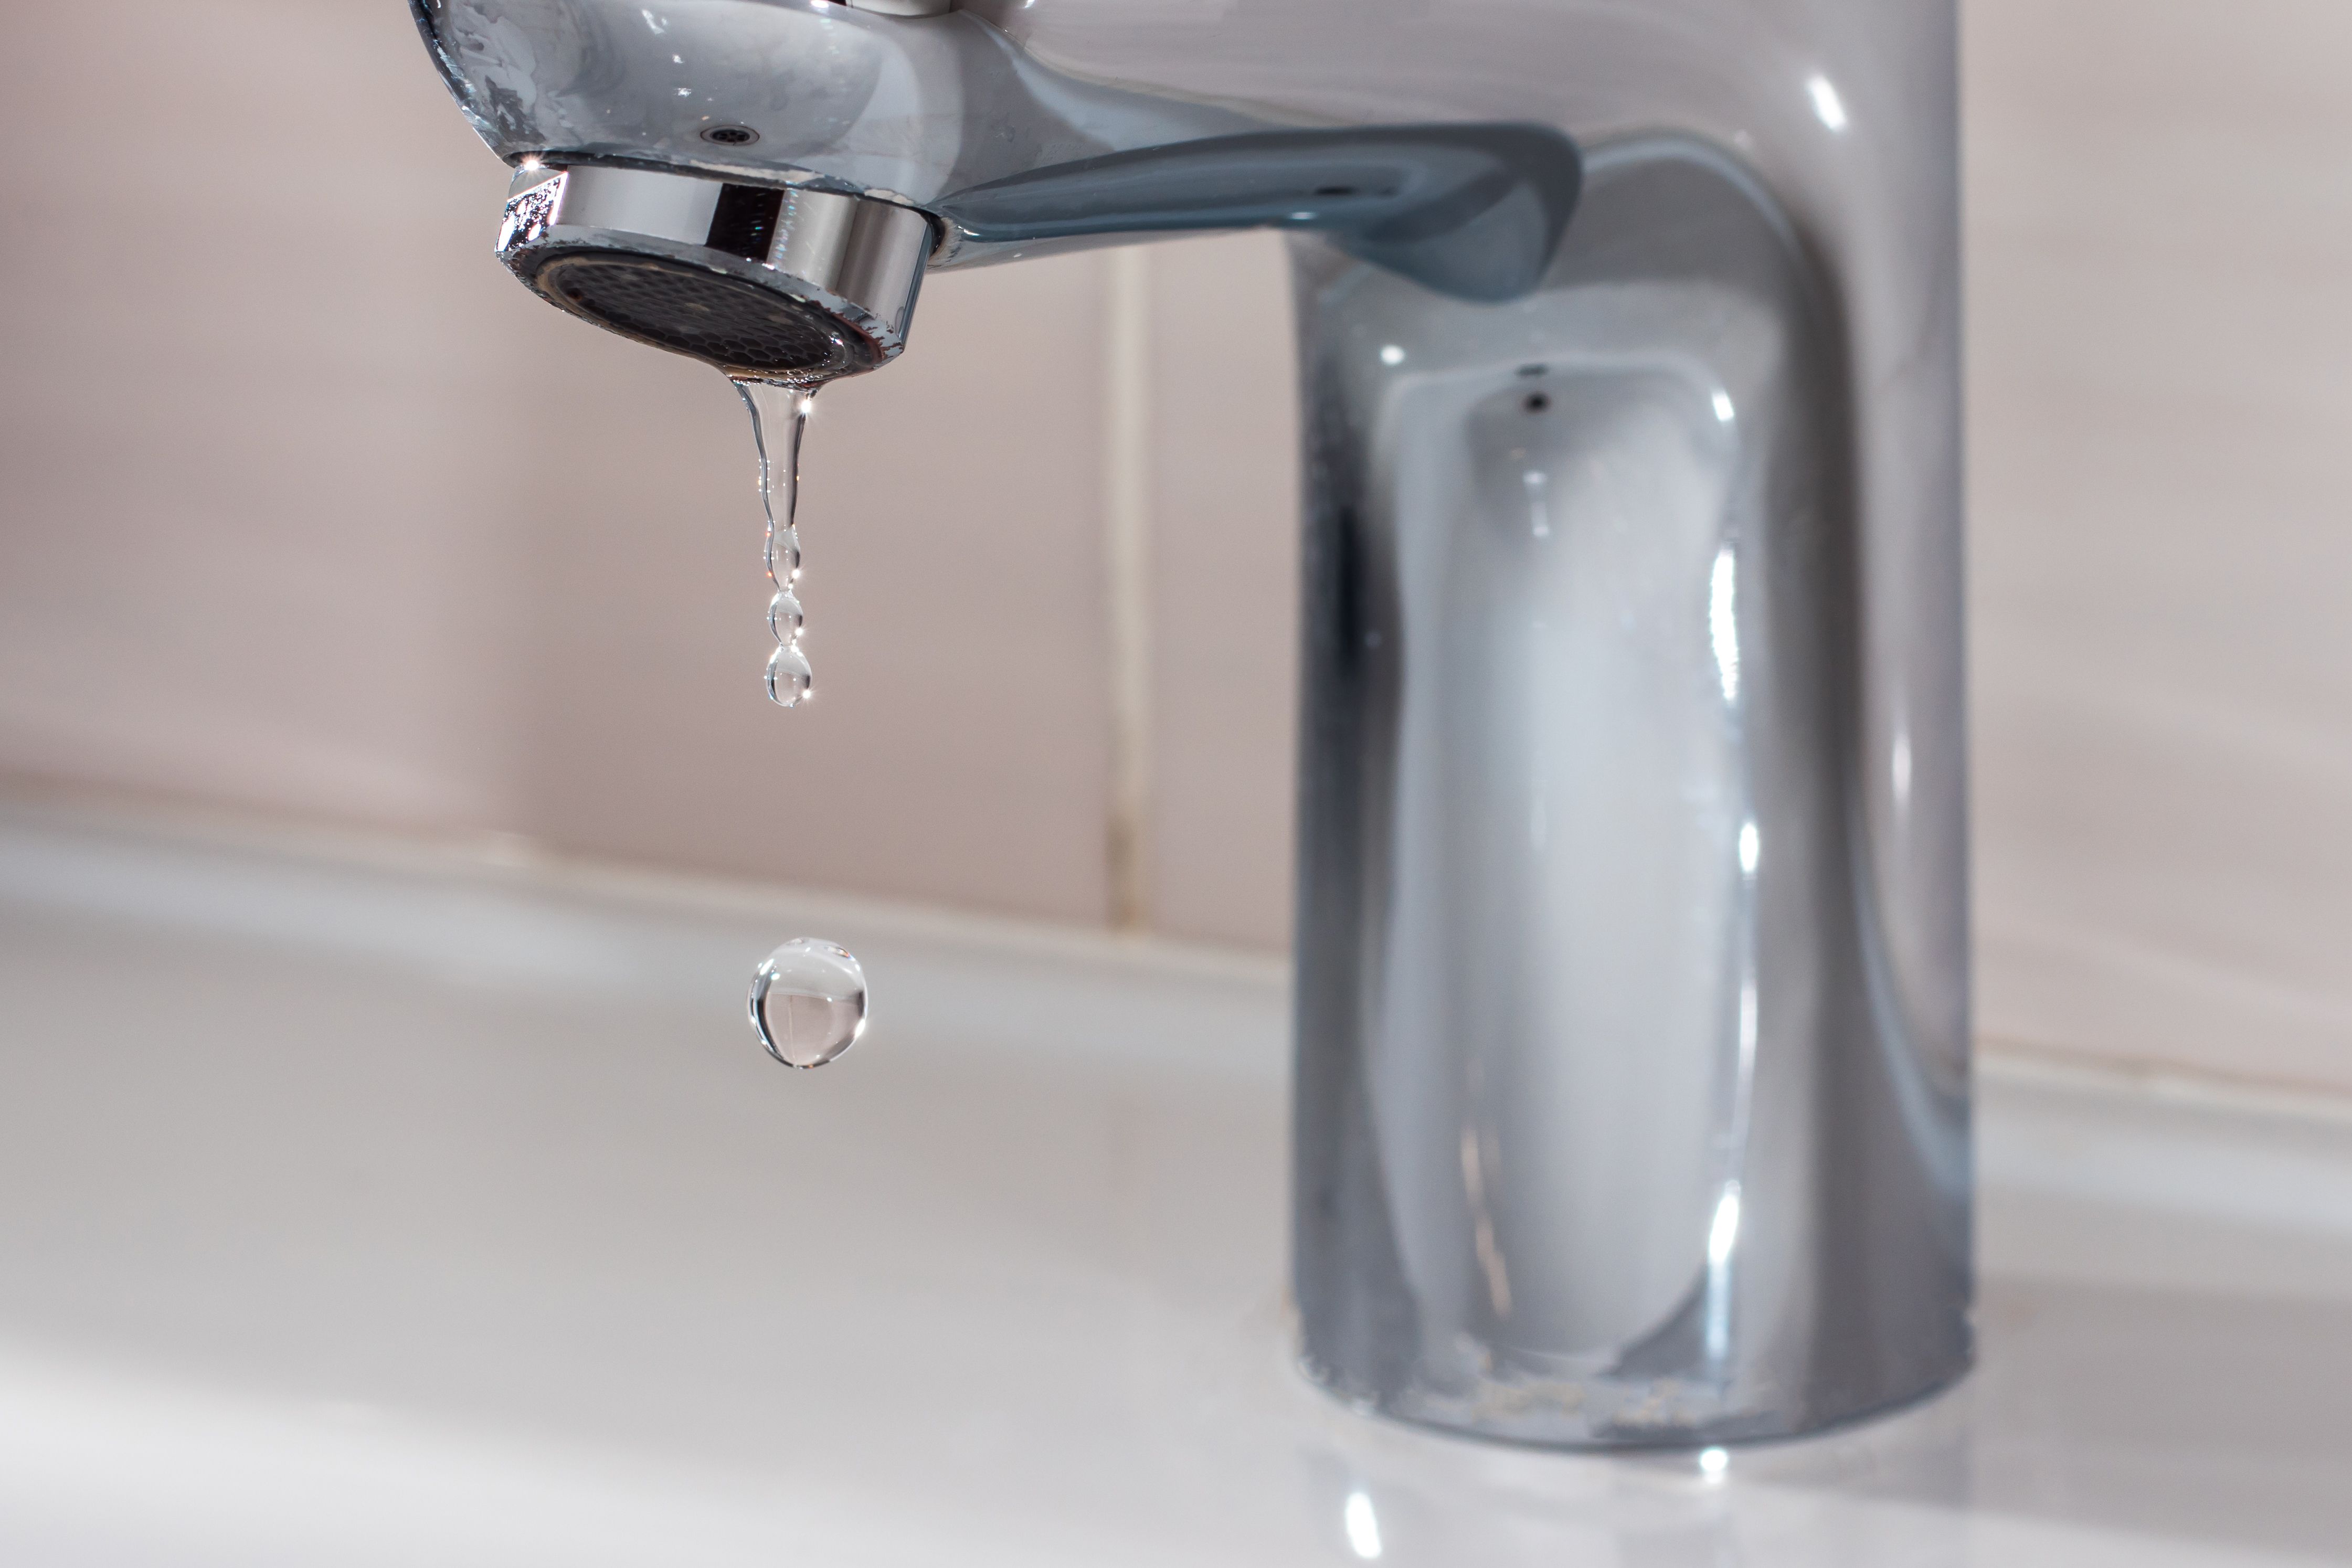 How to Fix a Leaky Faucet - 26 Easy Steps to Fix a Faucet